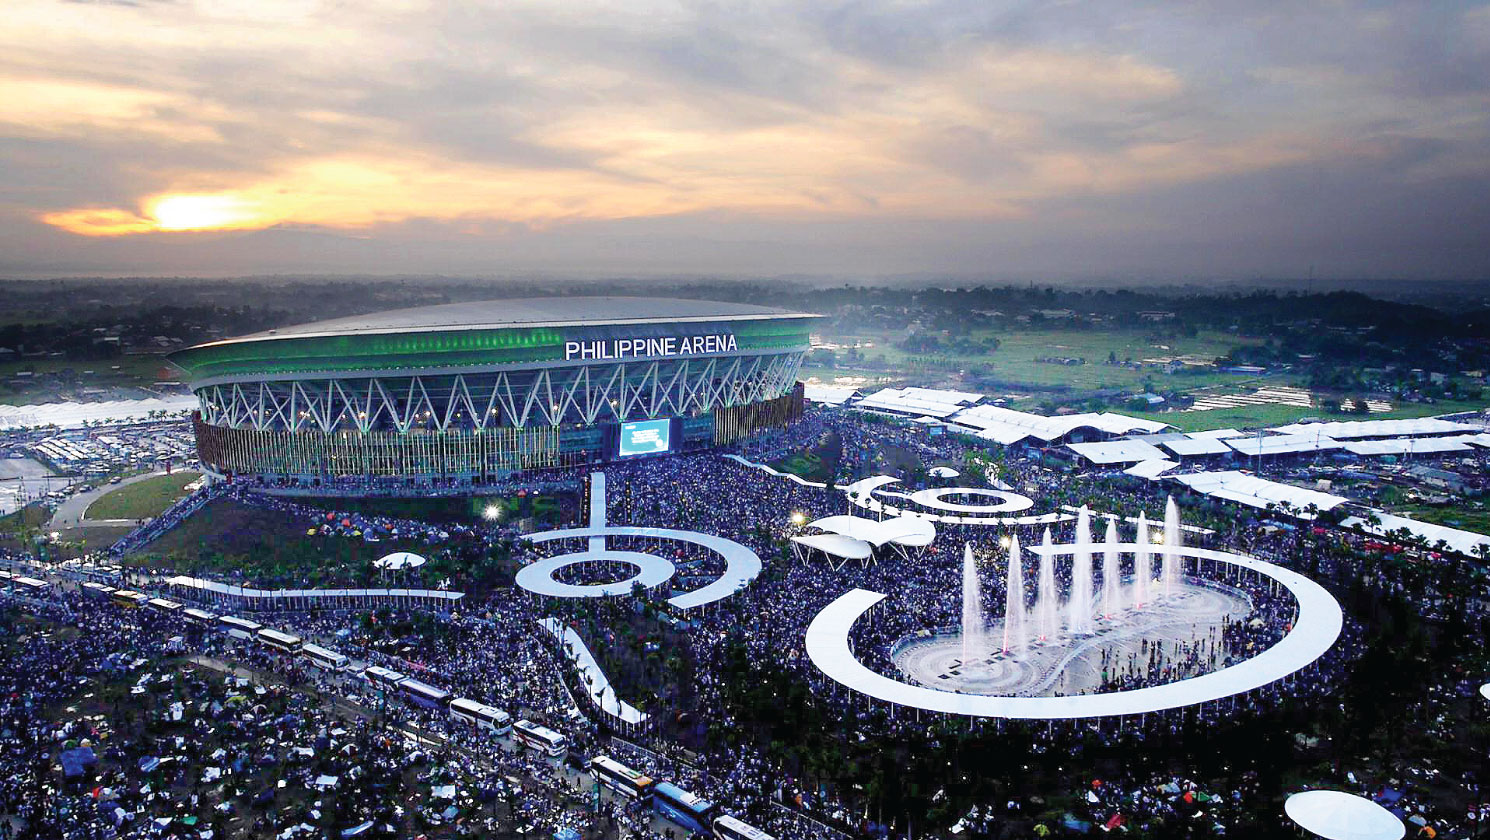 ***MISS UNIVERSE 2019 to be held in SOUTH KOREA ,SINGAPORE , PHILIPPINES , BRAZIL , DUBAI or ISRAEL??*** - Page 2 1-million-people-gather-at-Philippine-Arena-to-celebrate-the-New-Year-2015RESIZED